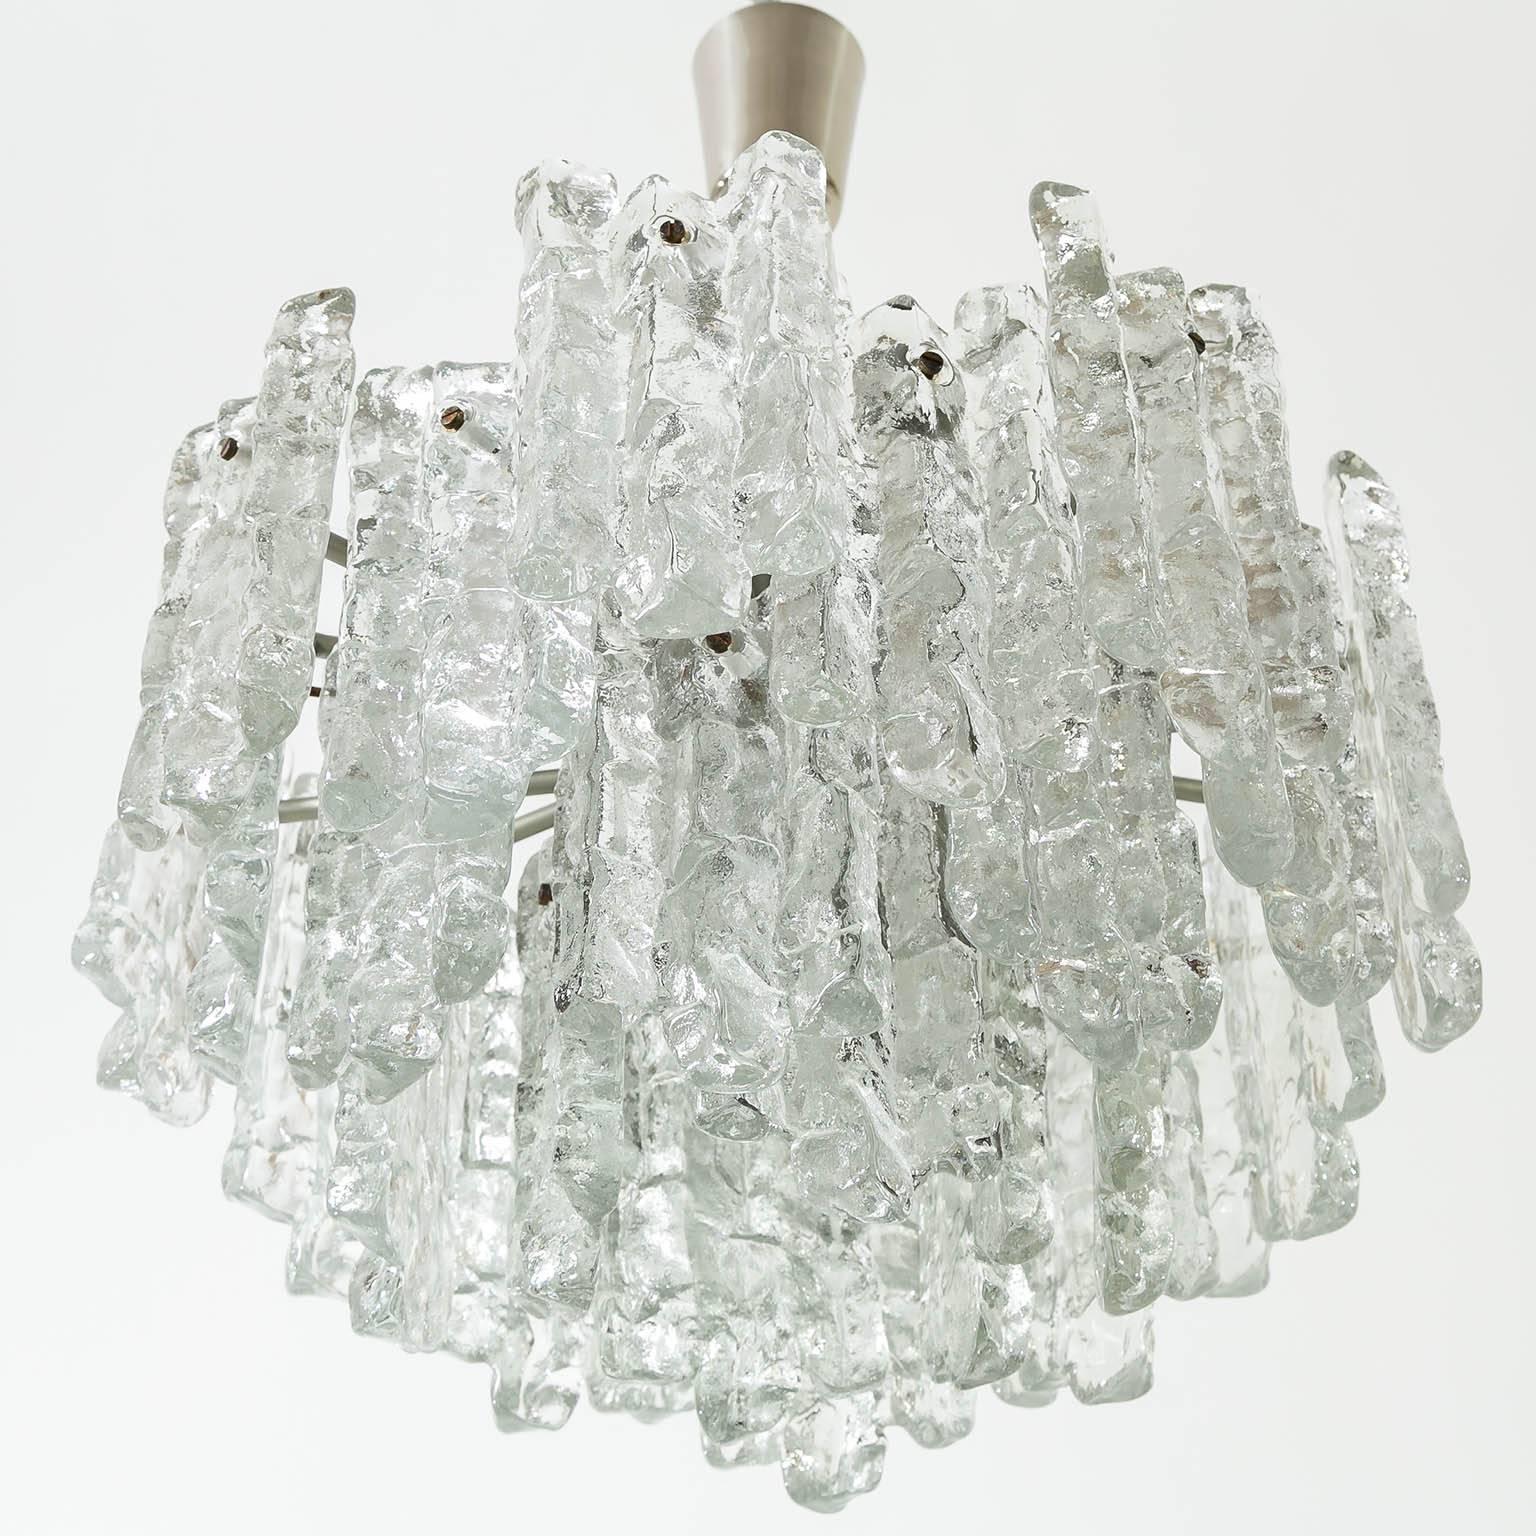 Pair of Kalmar Ice Glass Chandeliers Pendant Lights, 1970 For Sale 1